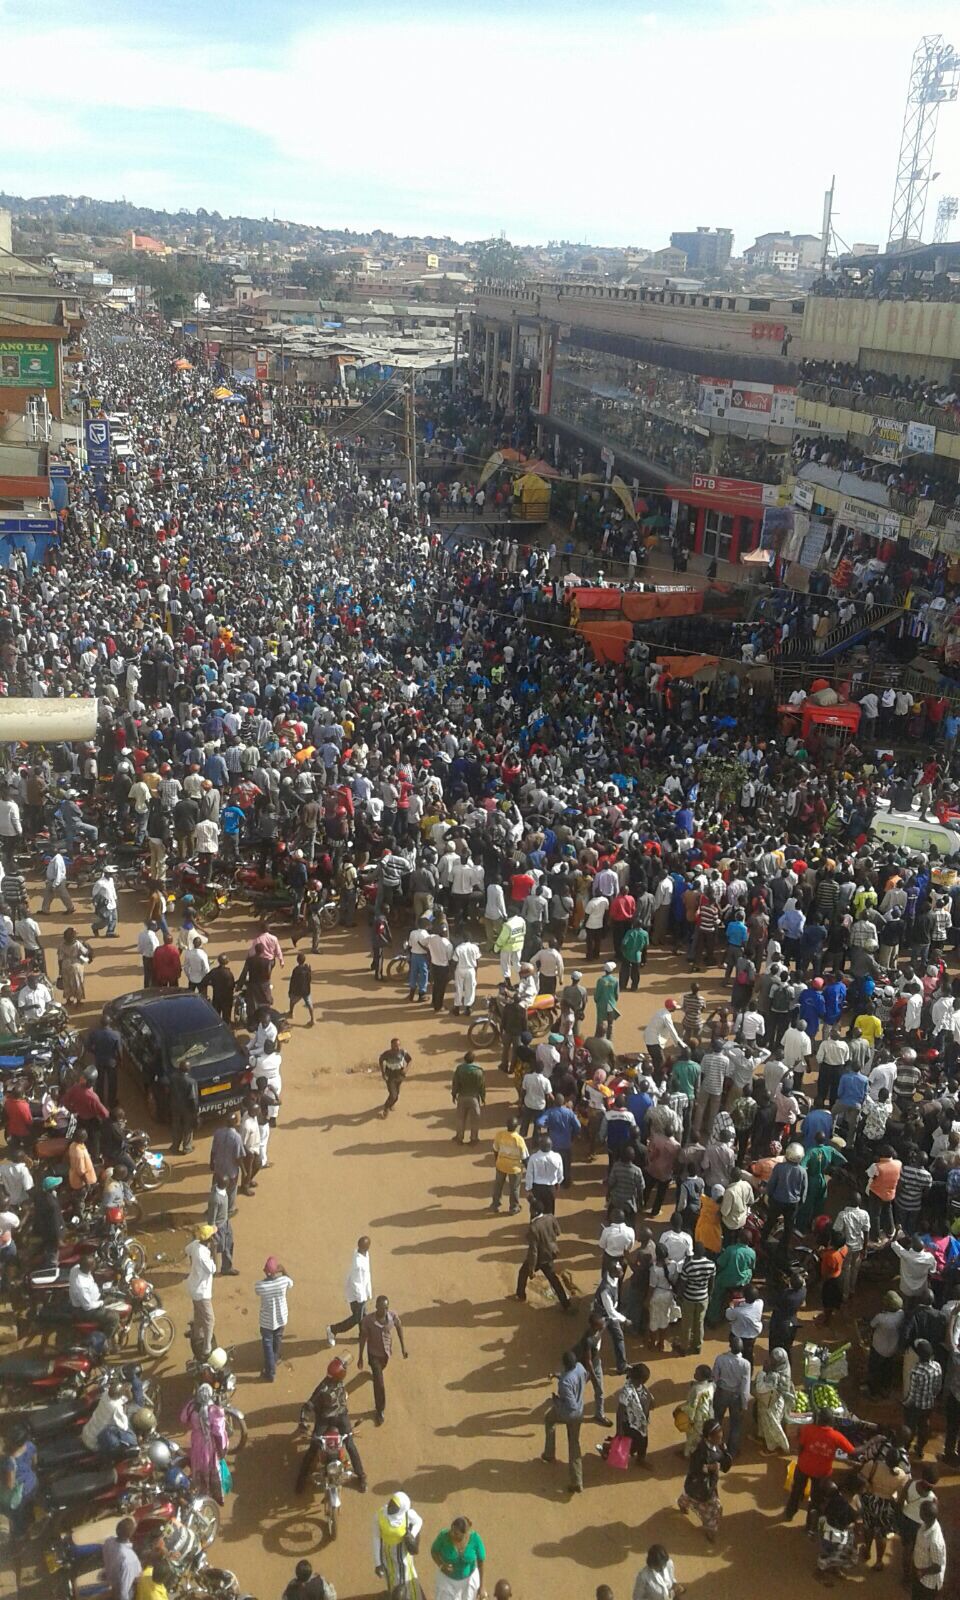 Besigye pulled a mammoth crowd on Wednesday afternoon that paralyzed business in Kampala.